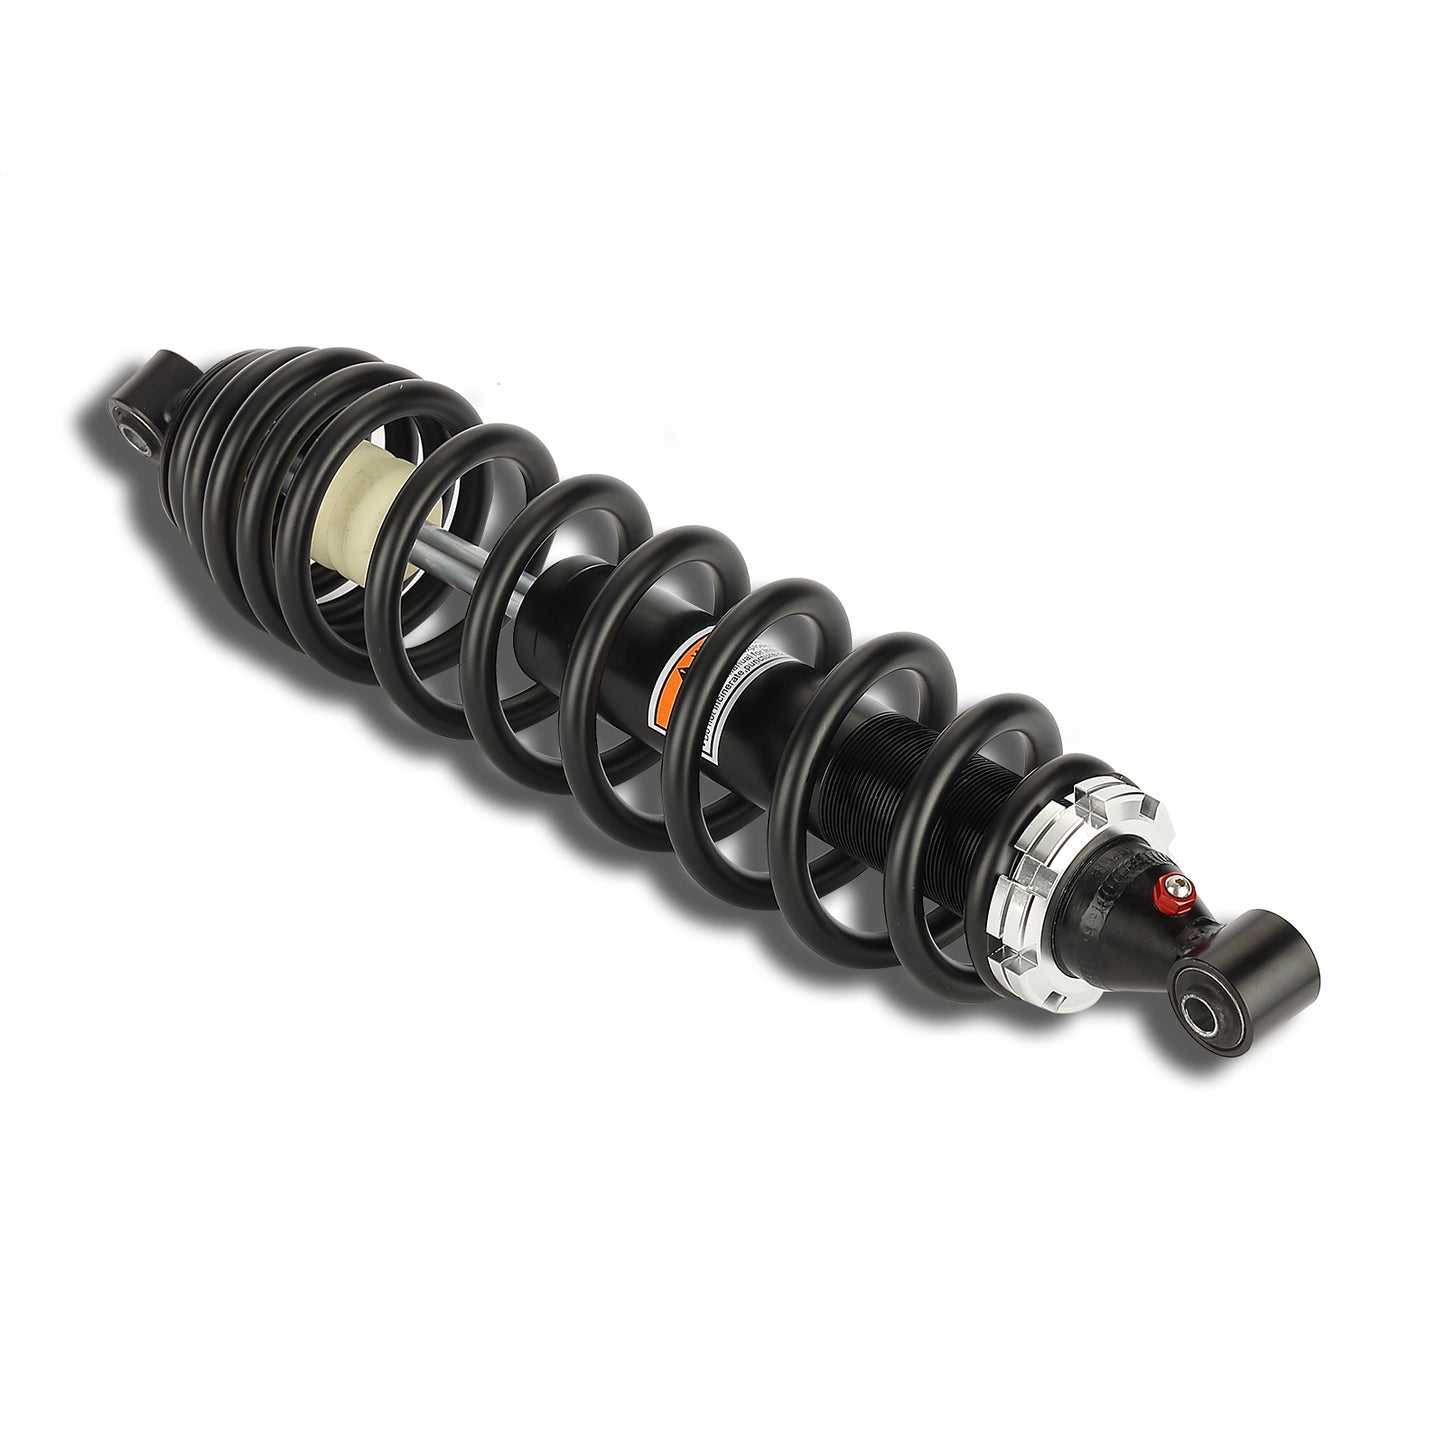 CAM-PO906 Caiman Shock Absorber Rear Left Right Shock Absorber Replacement for 2004-2013 Polaris Ranger 500 2X4, 4X4, 6X6 700 6X6 500 Touring HO 500 Touring EFI X2 500, X2 700, X2 800 Rear Shock